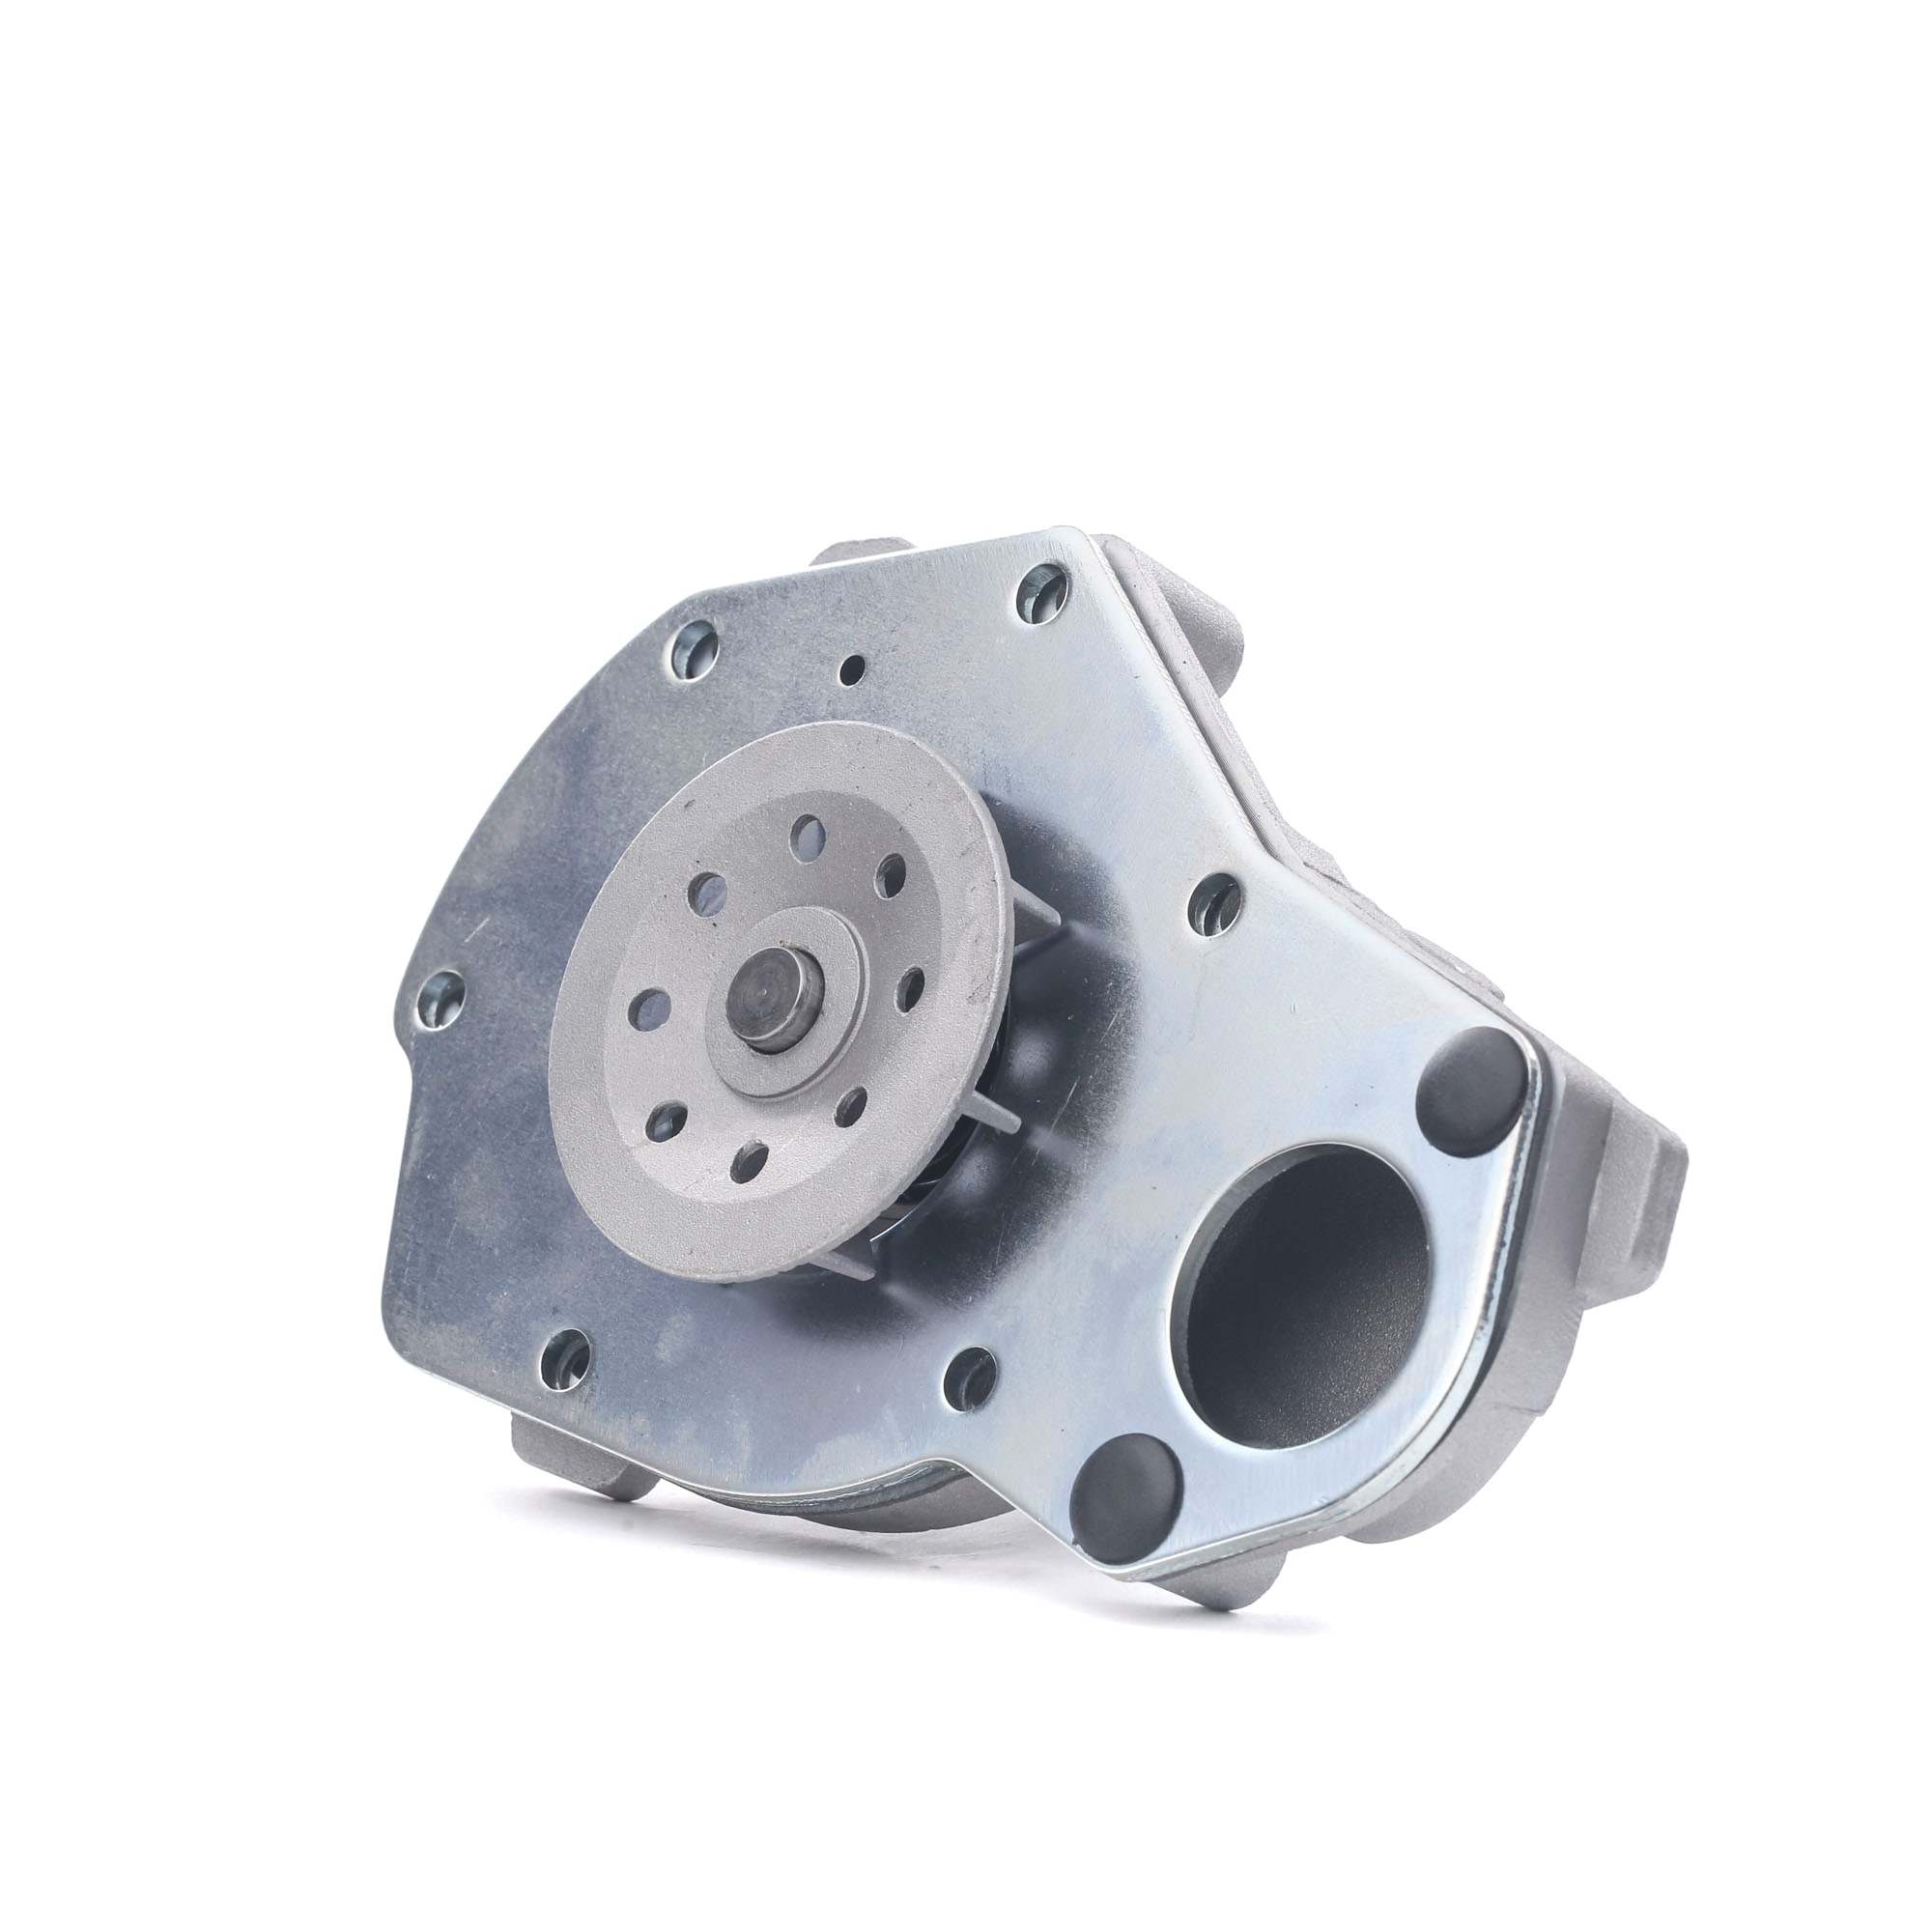 STARK SKWP-0520319 Water pump with flange, Mechanical